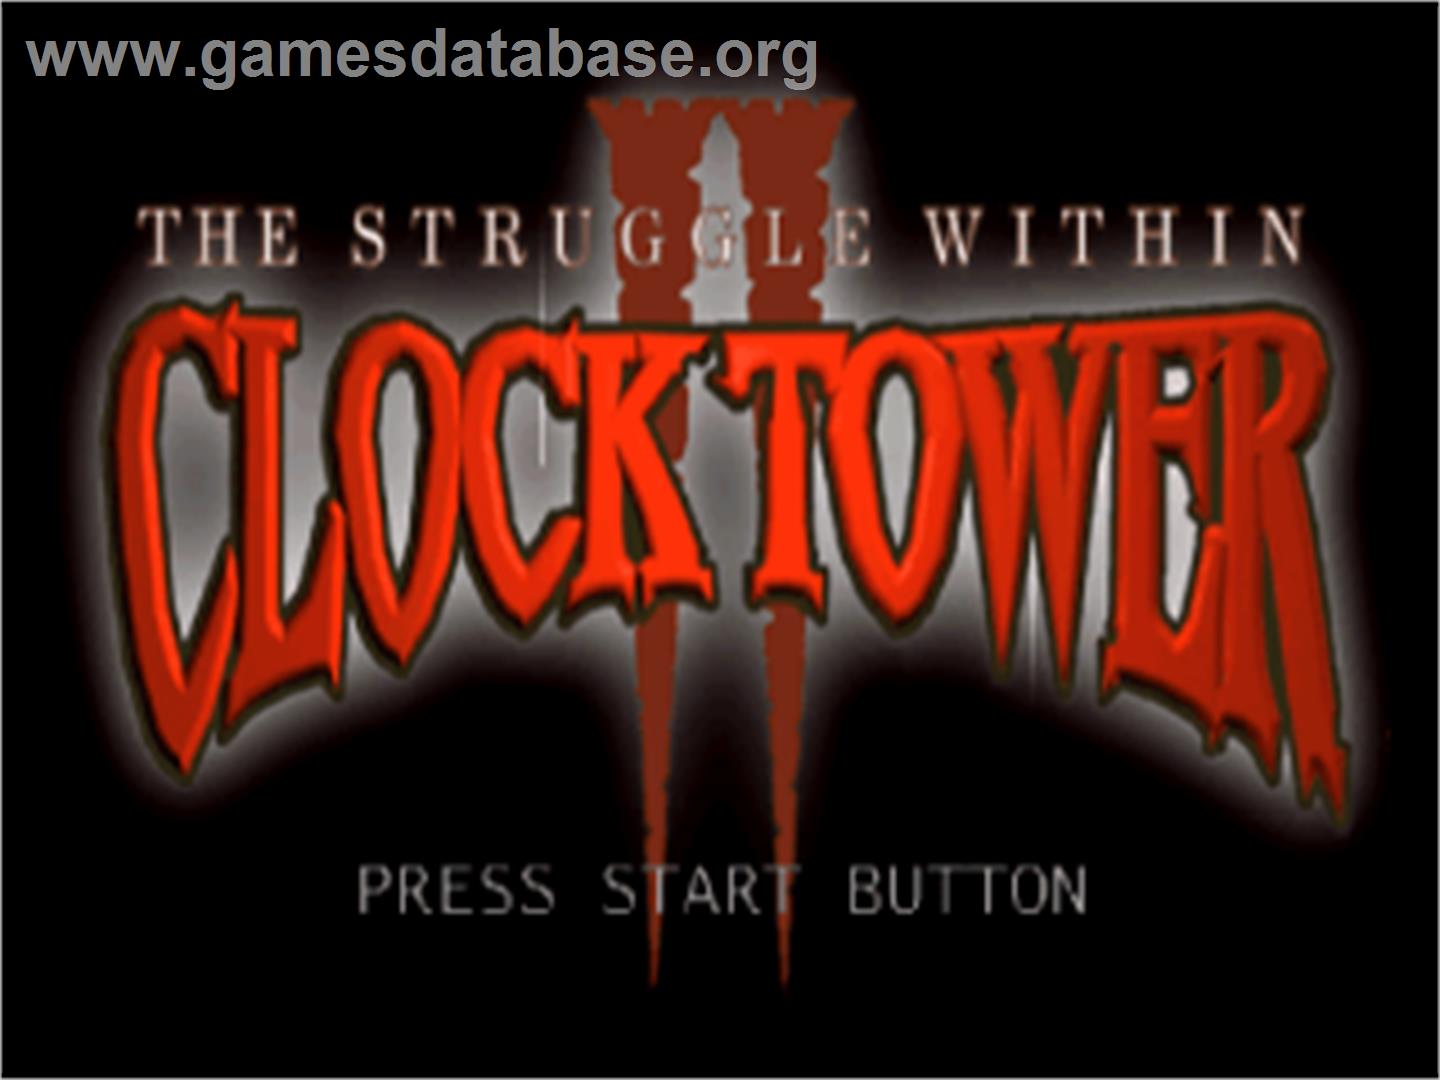 Clock Tower 2: The Struggle Within - Sony Playstation - Artwork - Title Screen